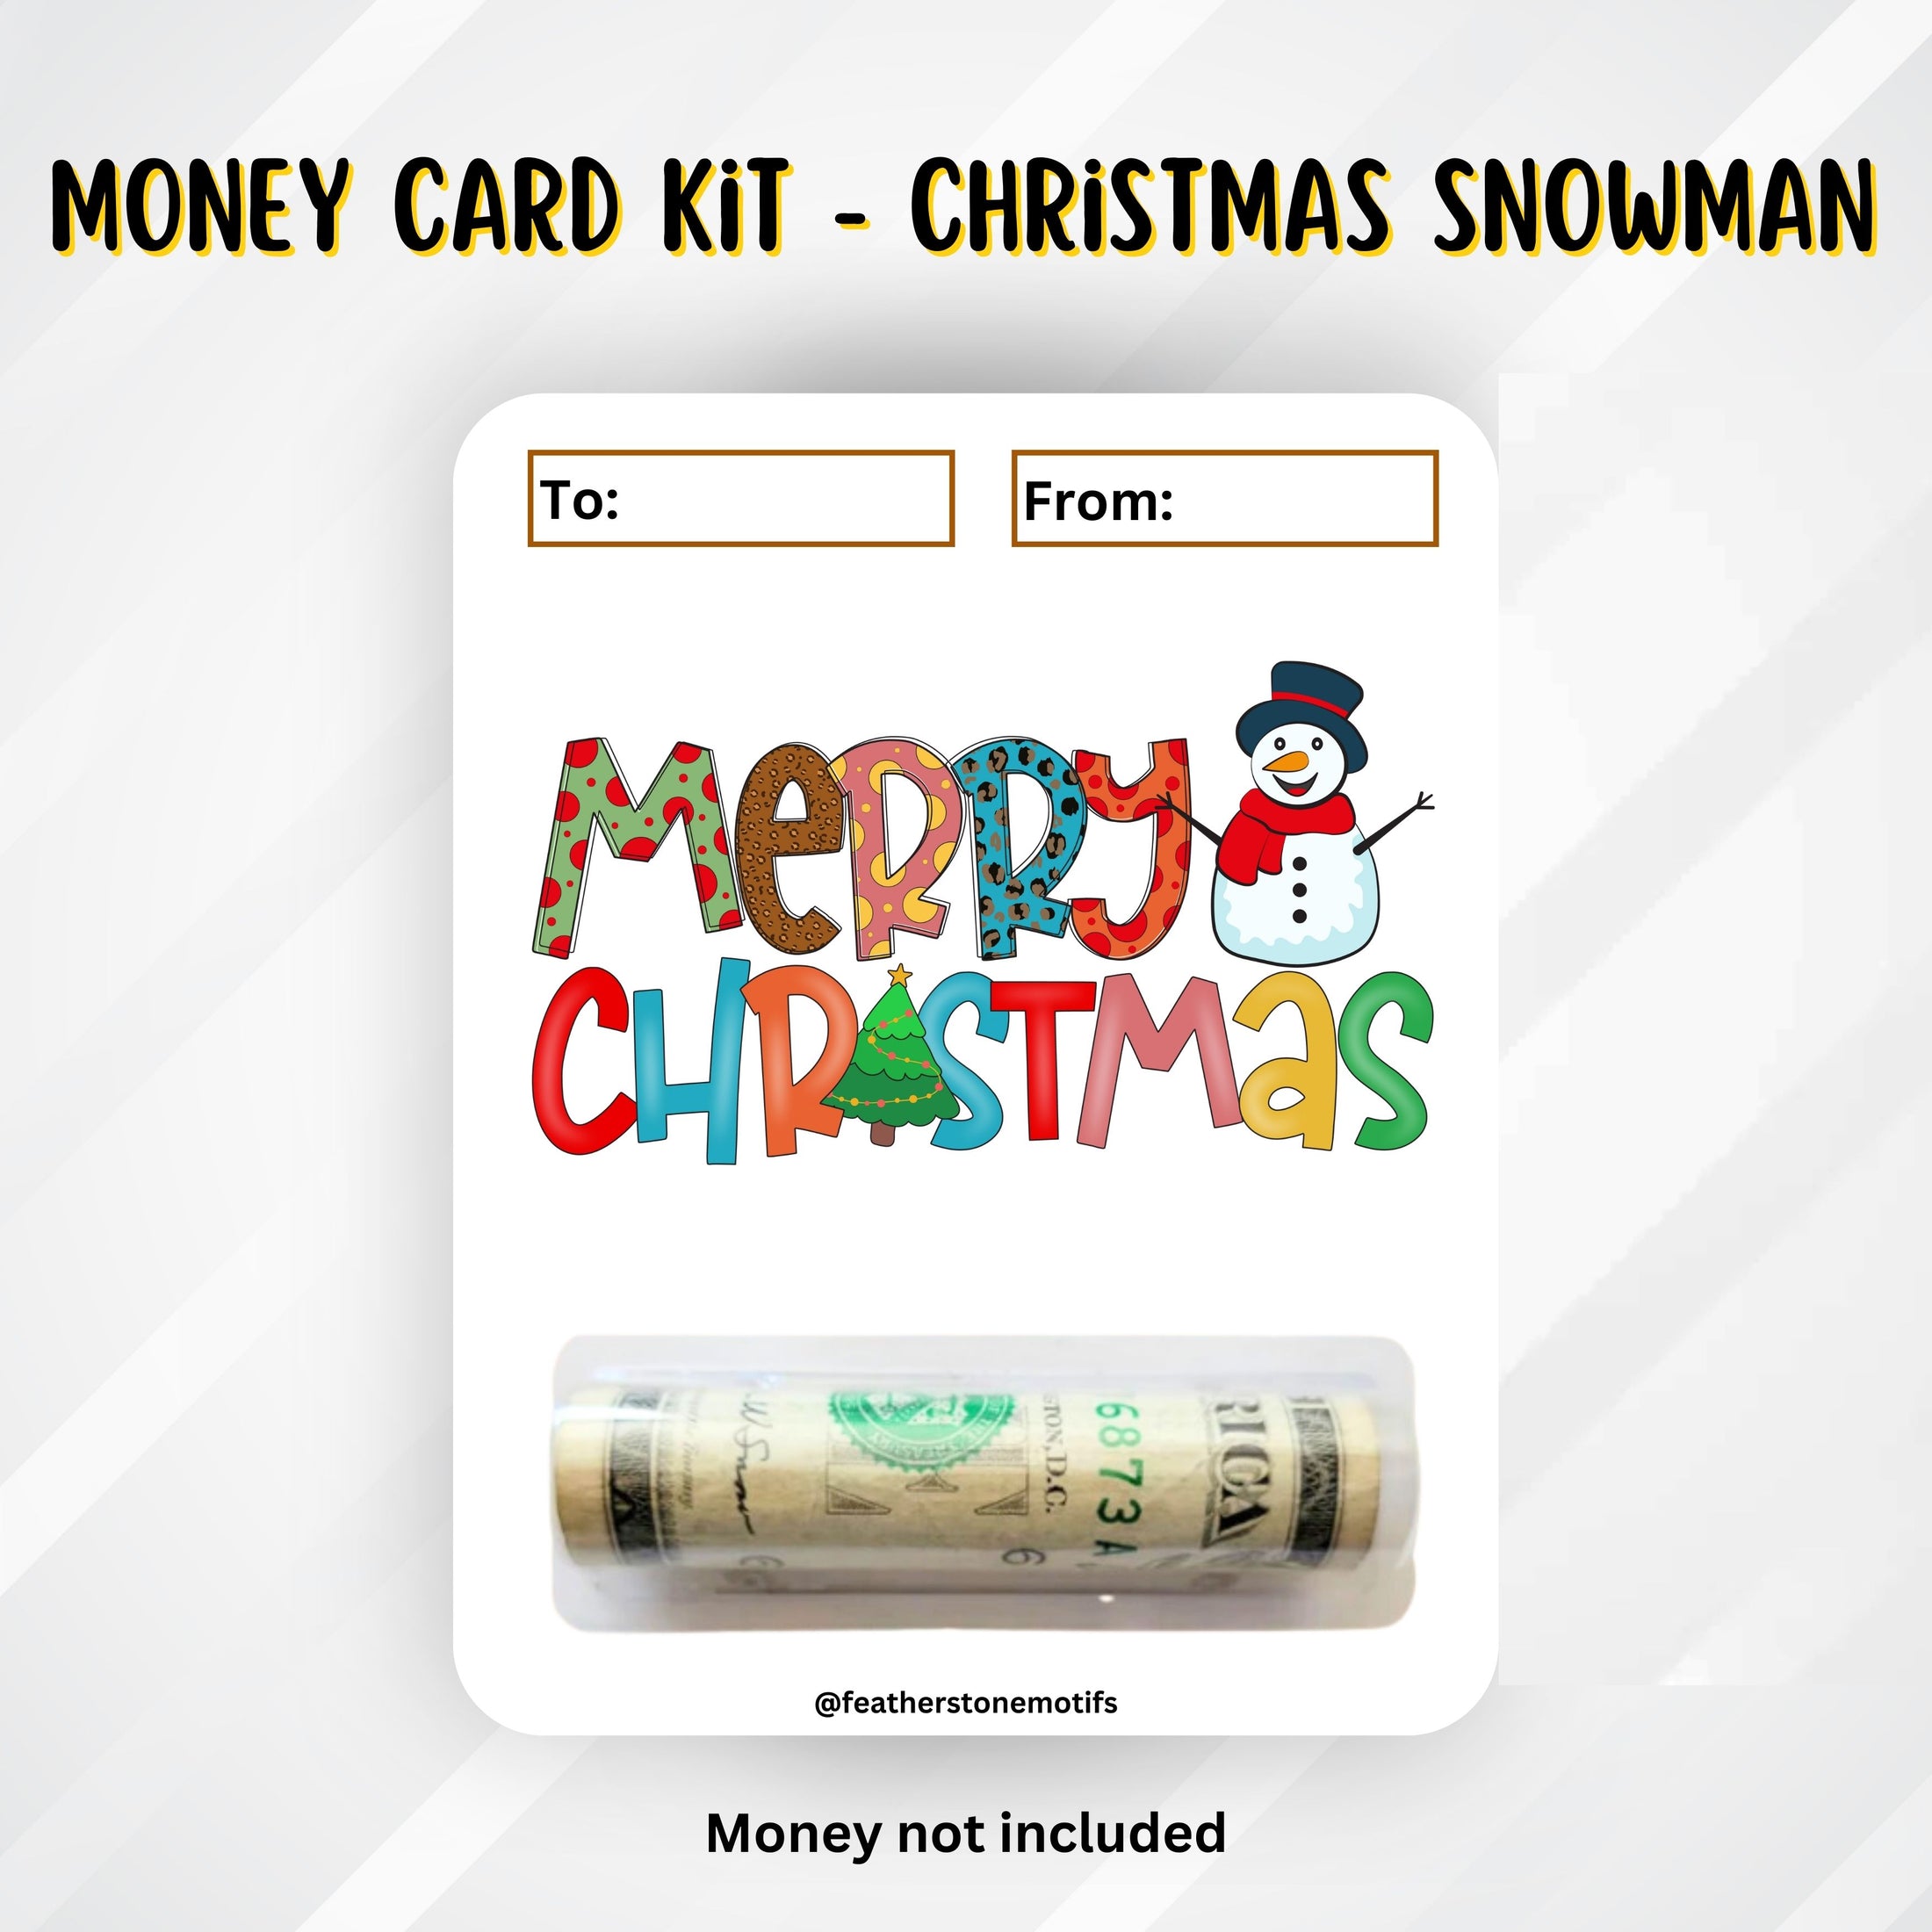 This image shows the money tube attached to the Christmas Snowman Money Card.